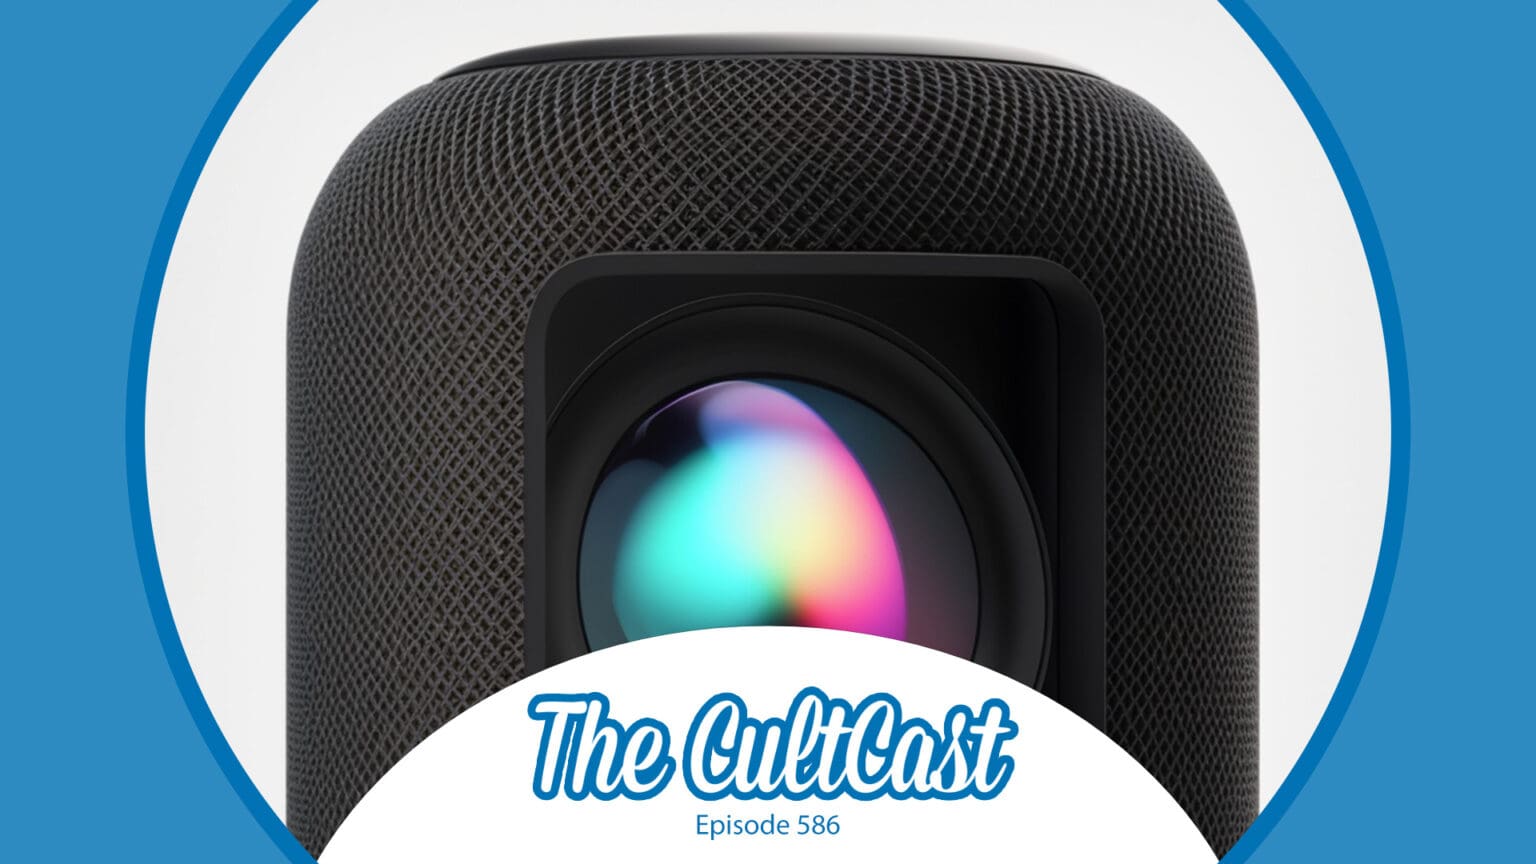 AI-generated image of a HomePod smart speaker with an embedded display.